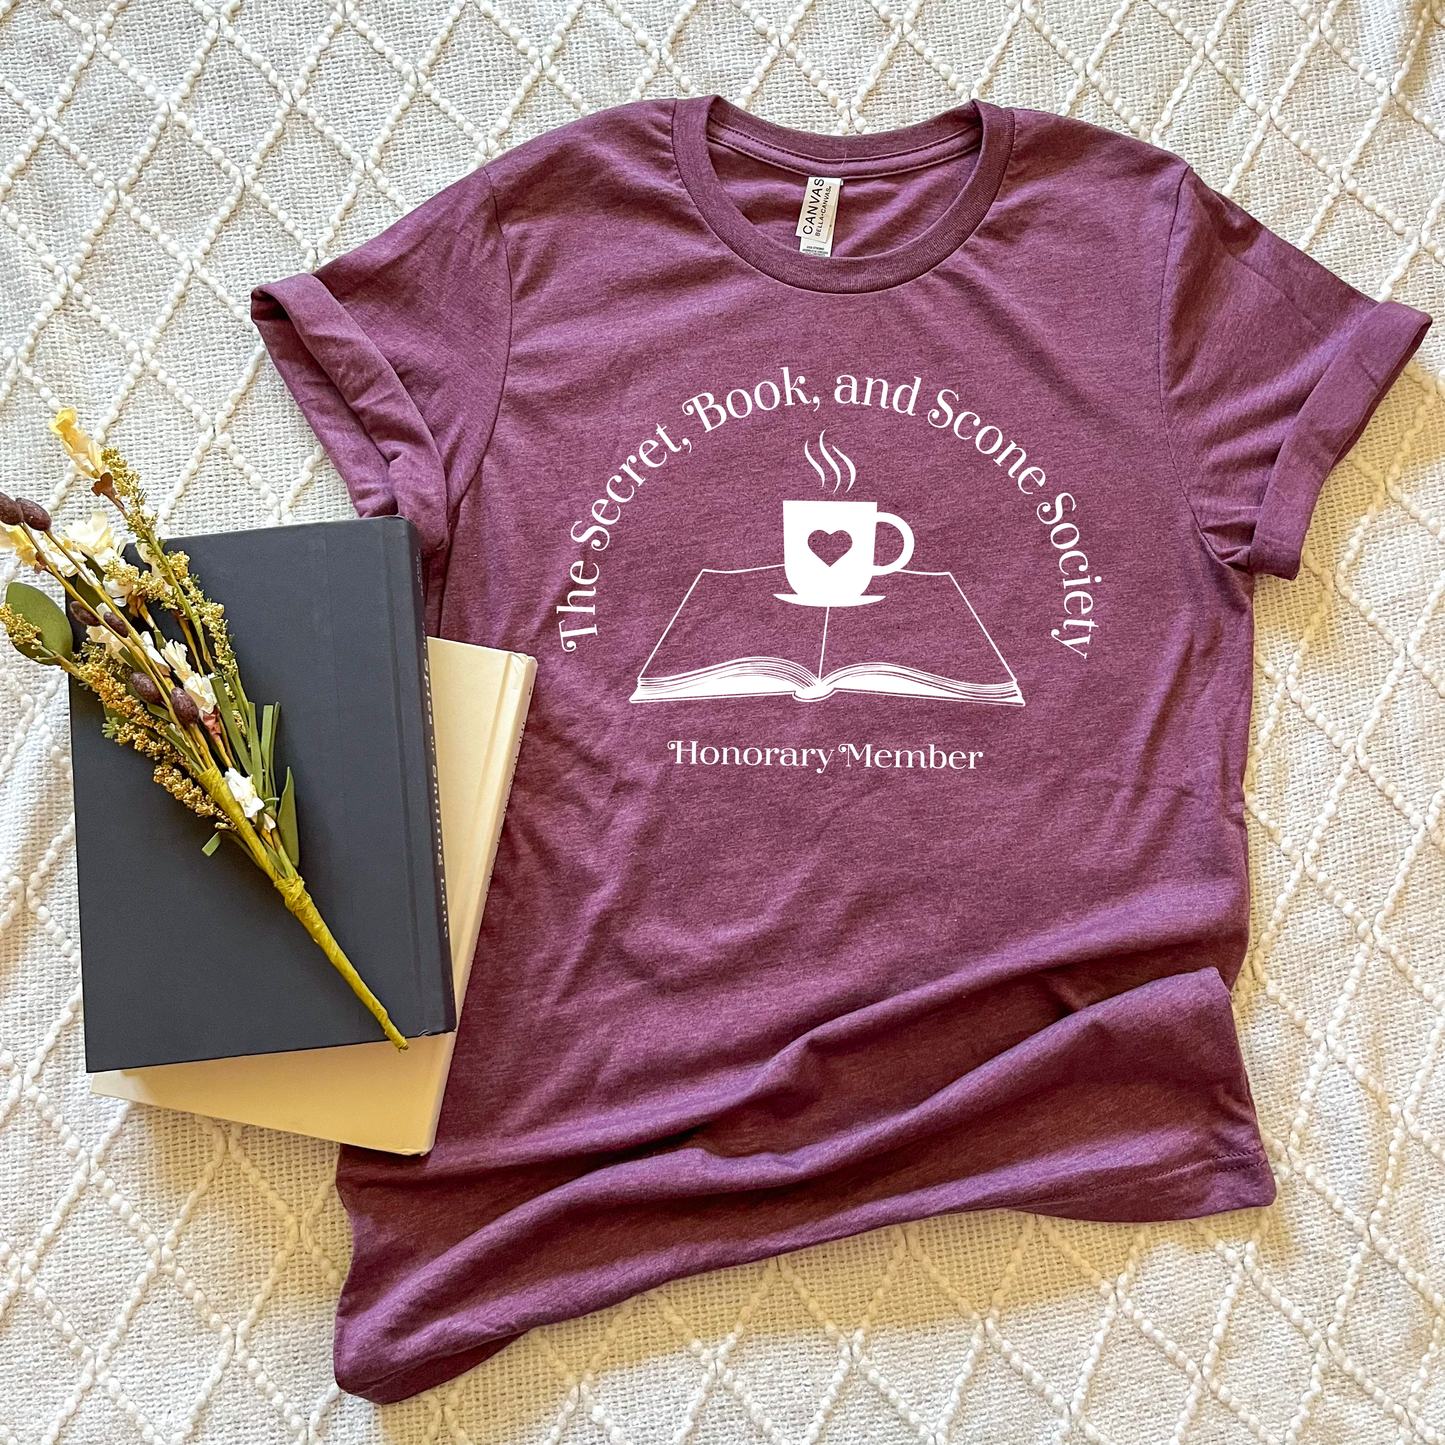 Secret, Book, and Scone Society T-Shirt